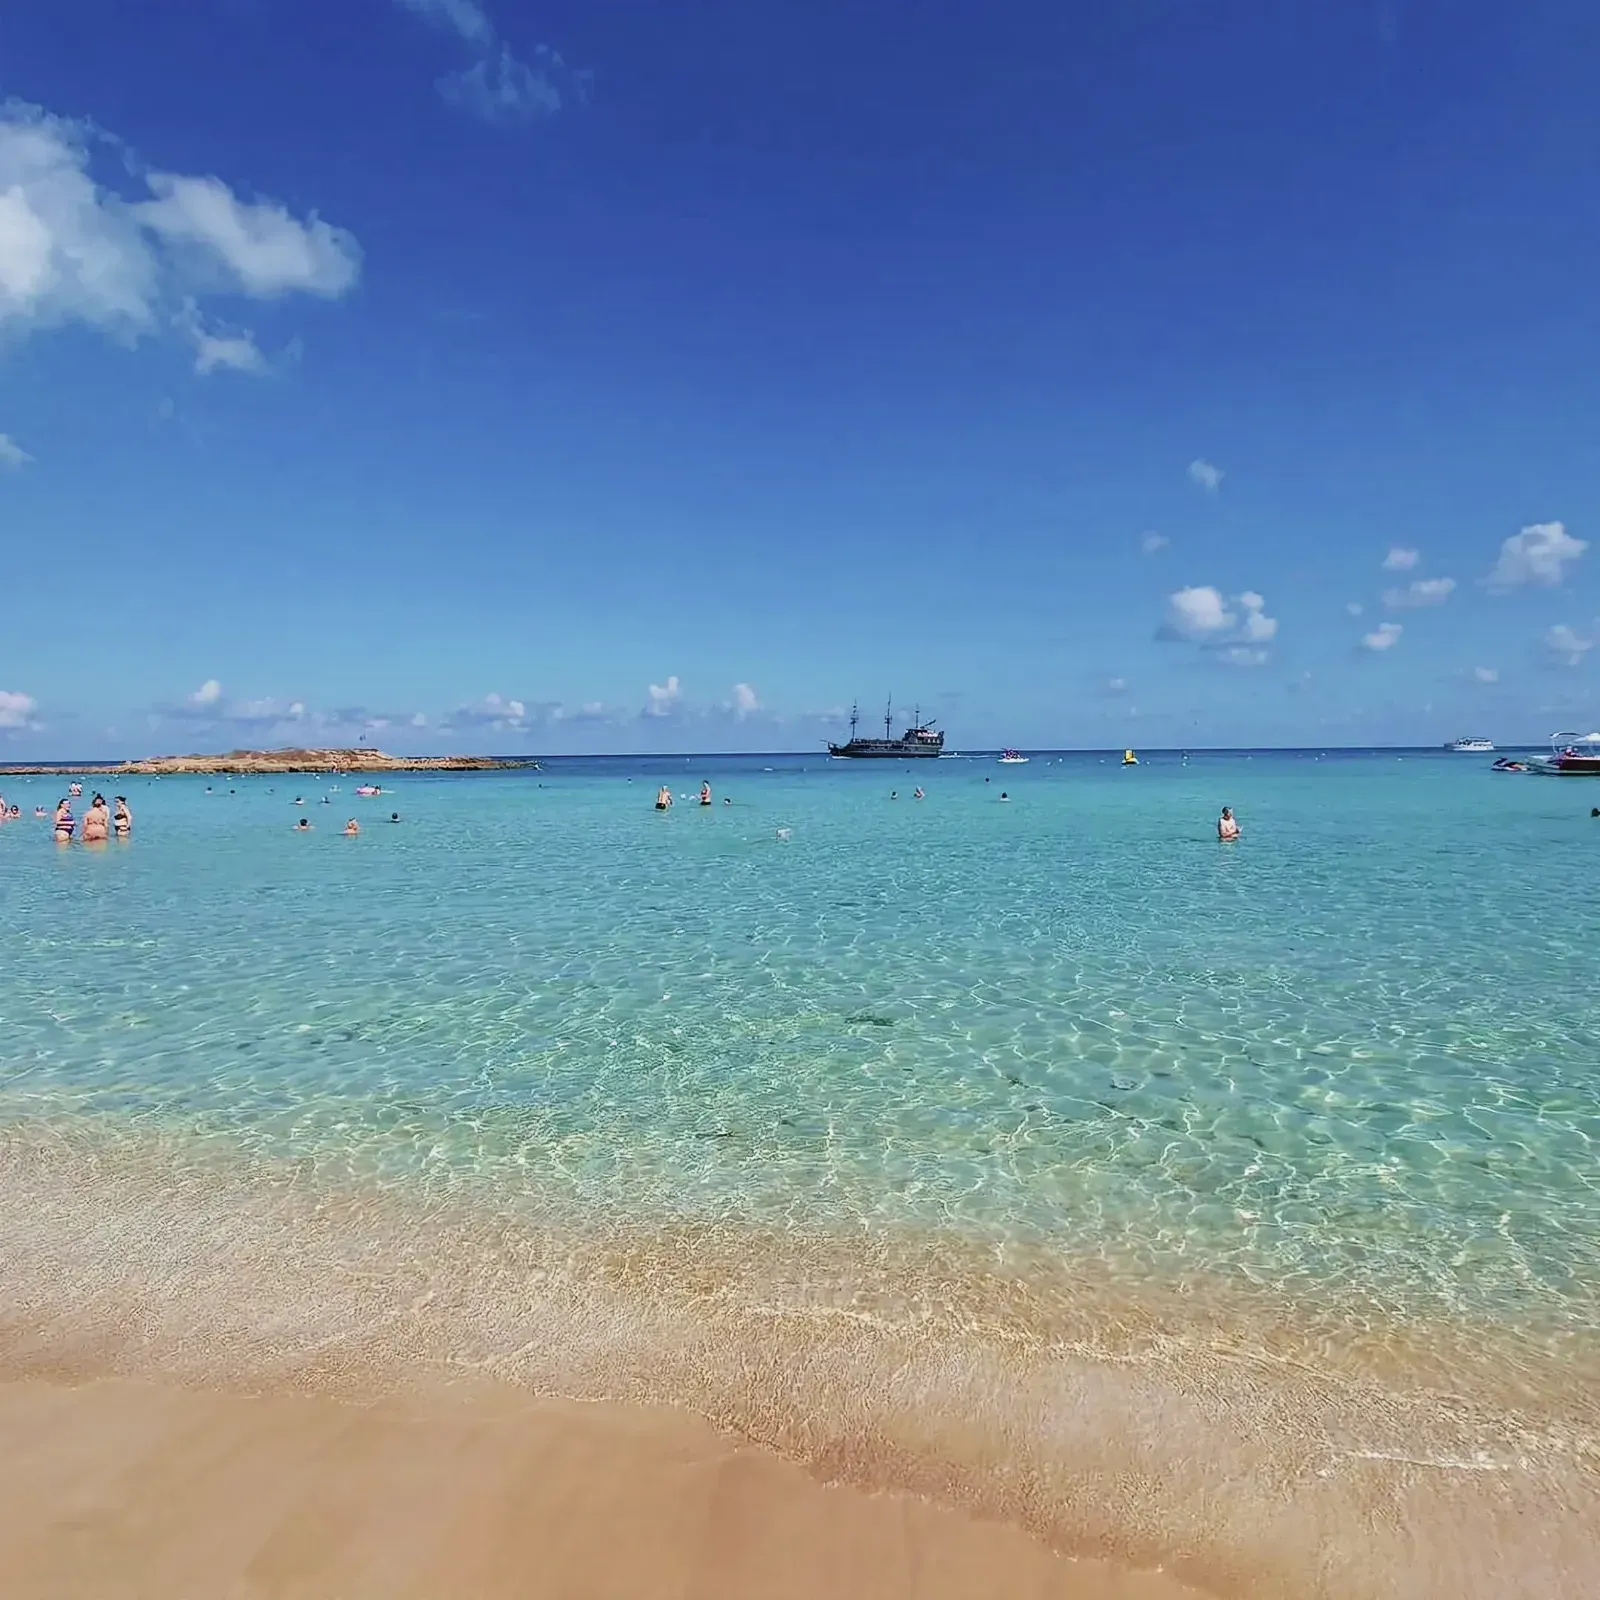 People enjoying the golden beaches and clear waters of Fig Tree Bay in Protaras, Cyprus.